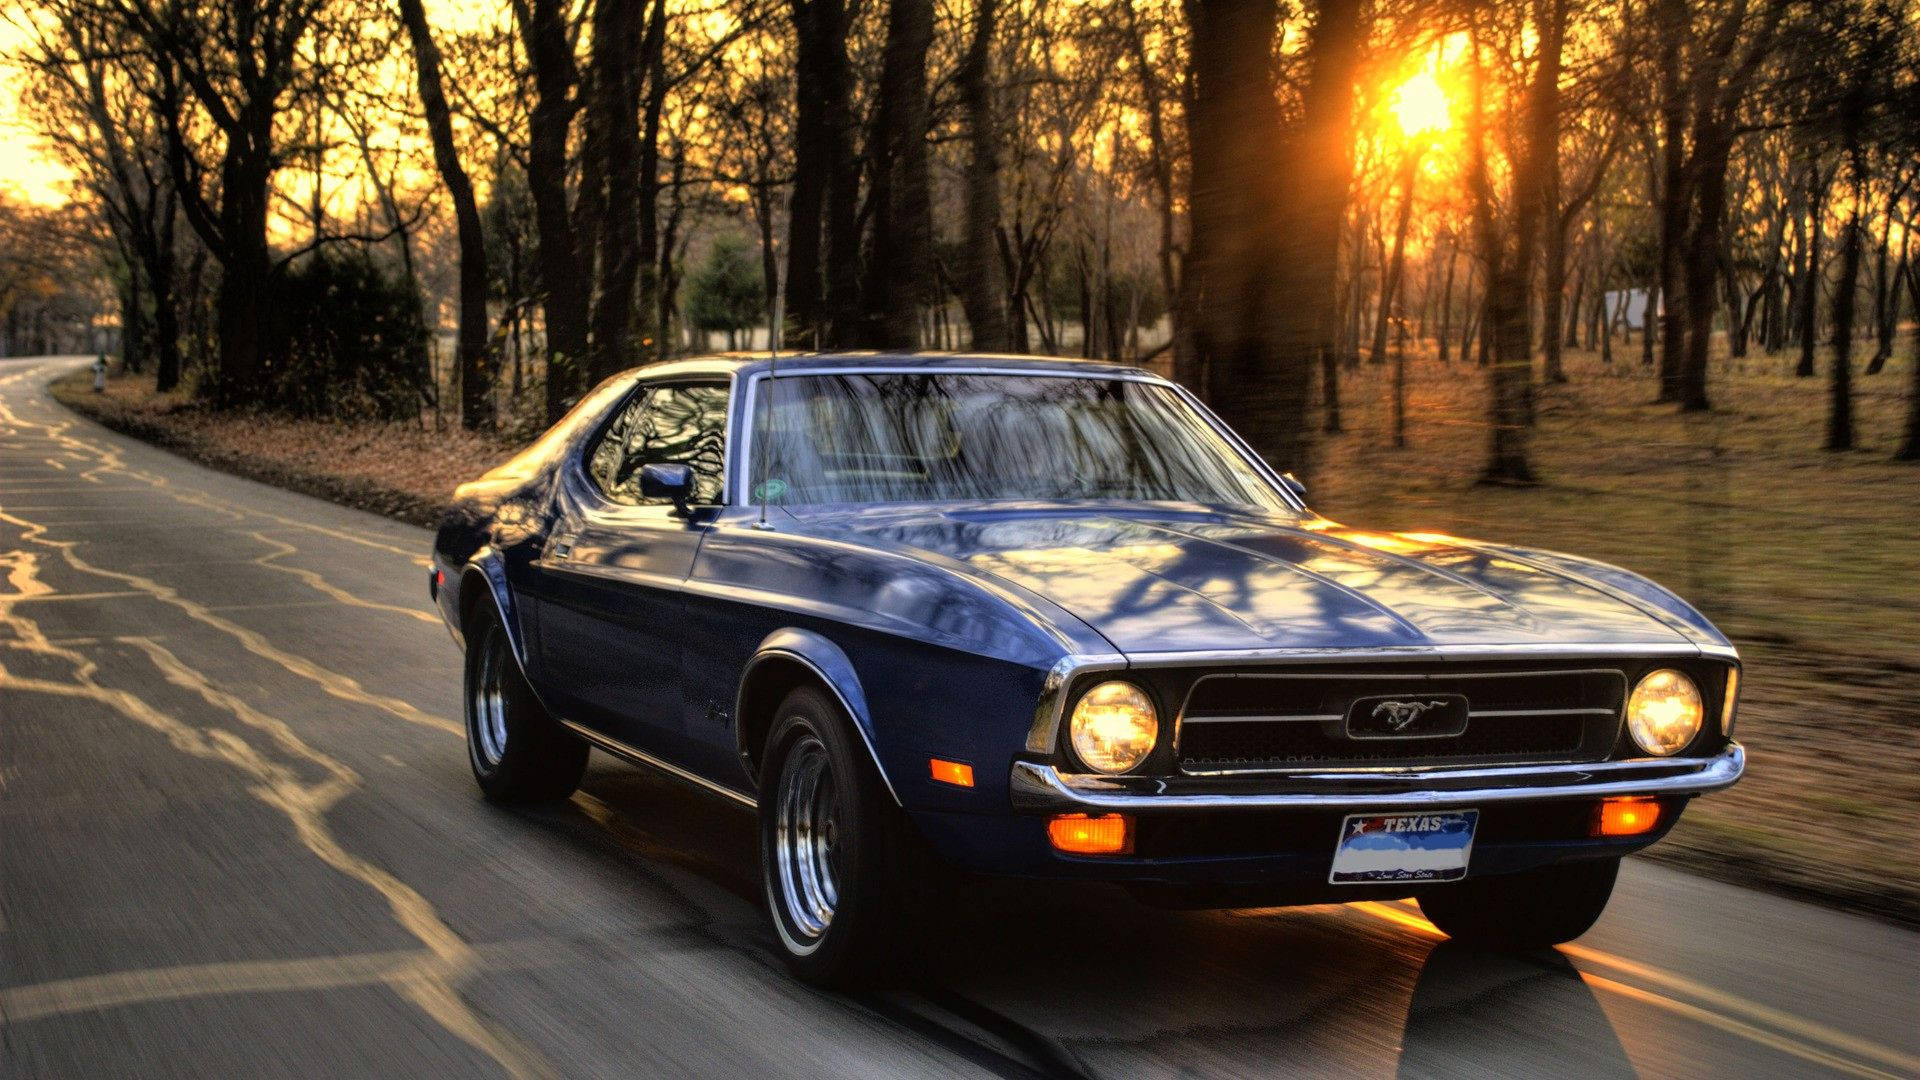 American Ford Mustang Muscle Car Background